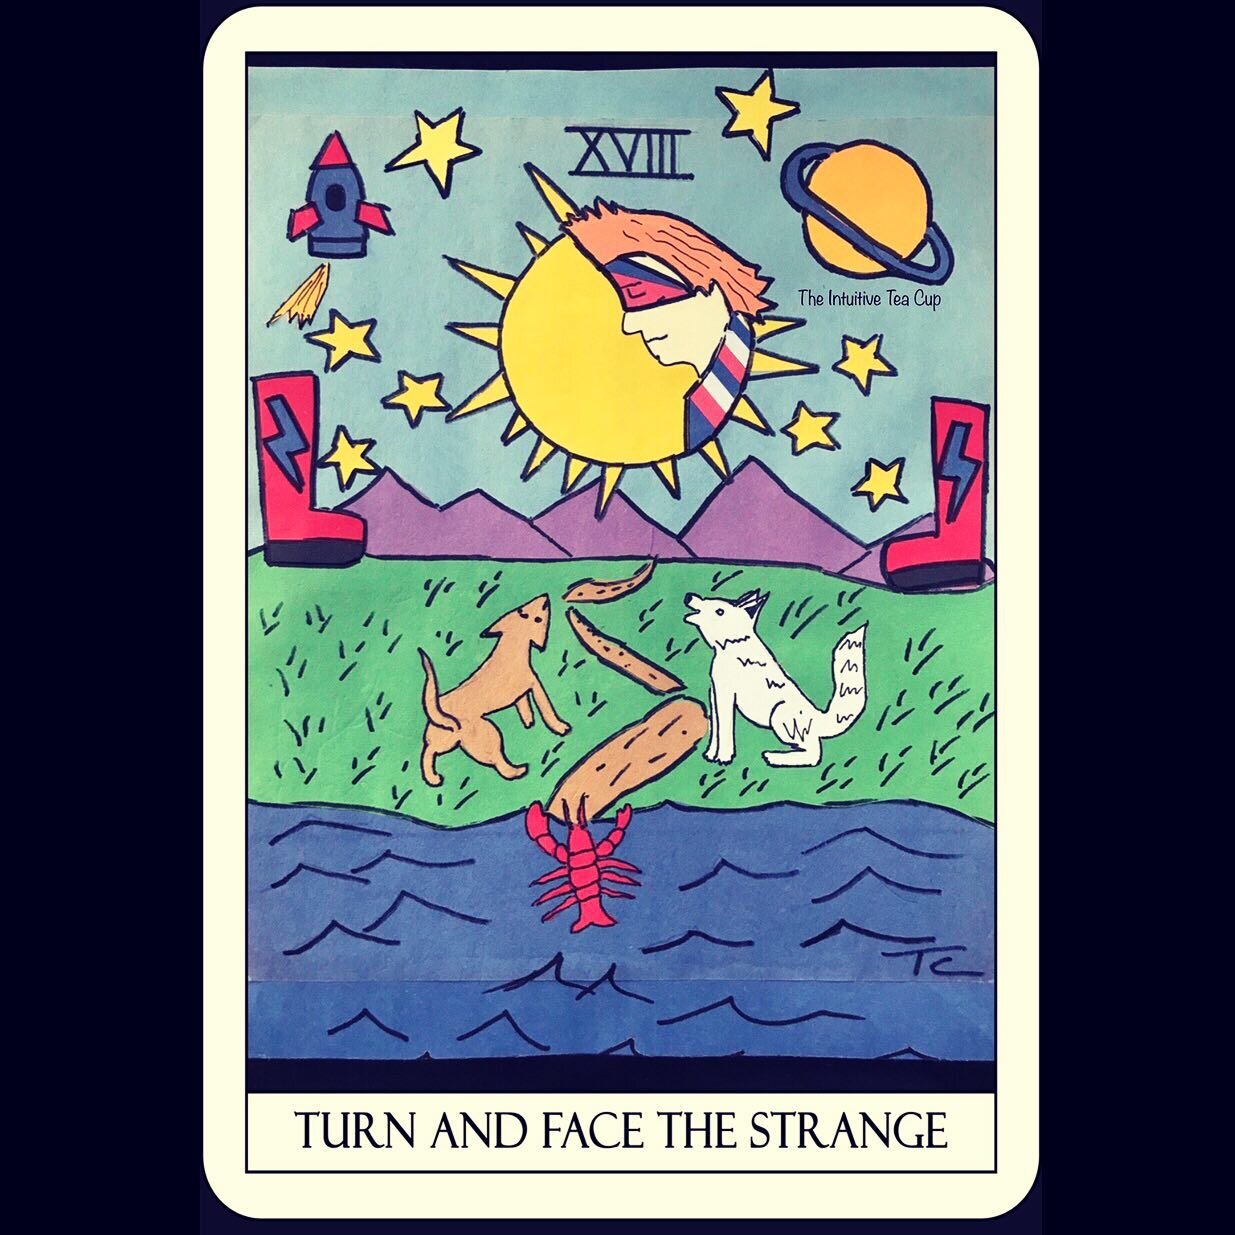 HAPPY BIRTHDAY DAVID BOWIE! It&rsquo;s Capricorn Season, so let&rsquo;s do the work and turn our dedication and grit into unlimited future successes! 💪 Swipe to reveal your tarot message from this David Bowie-inspired Tarot Card! This is 1 of a 4 Se